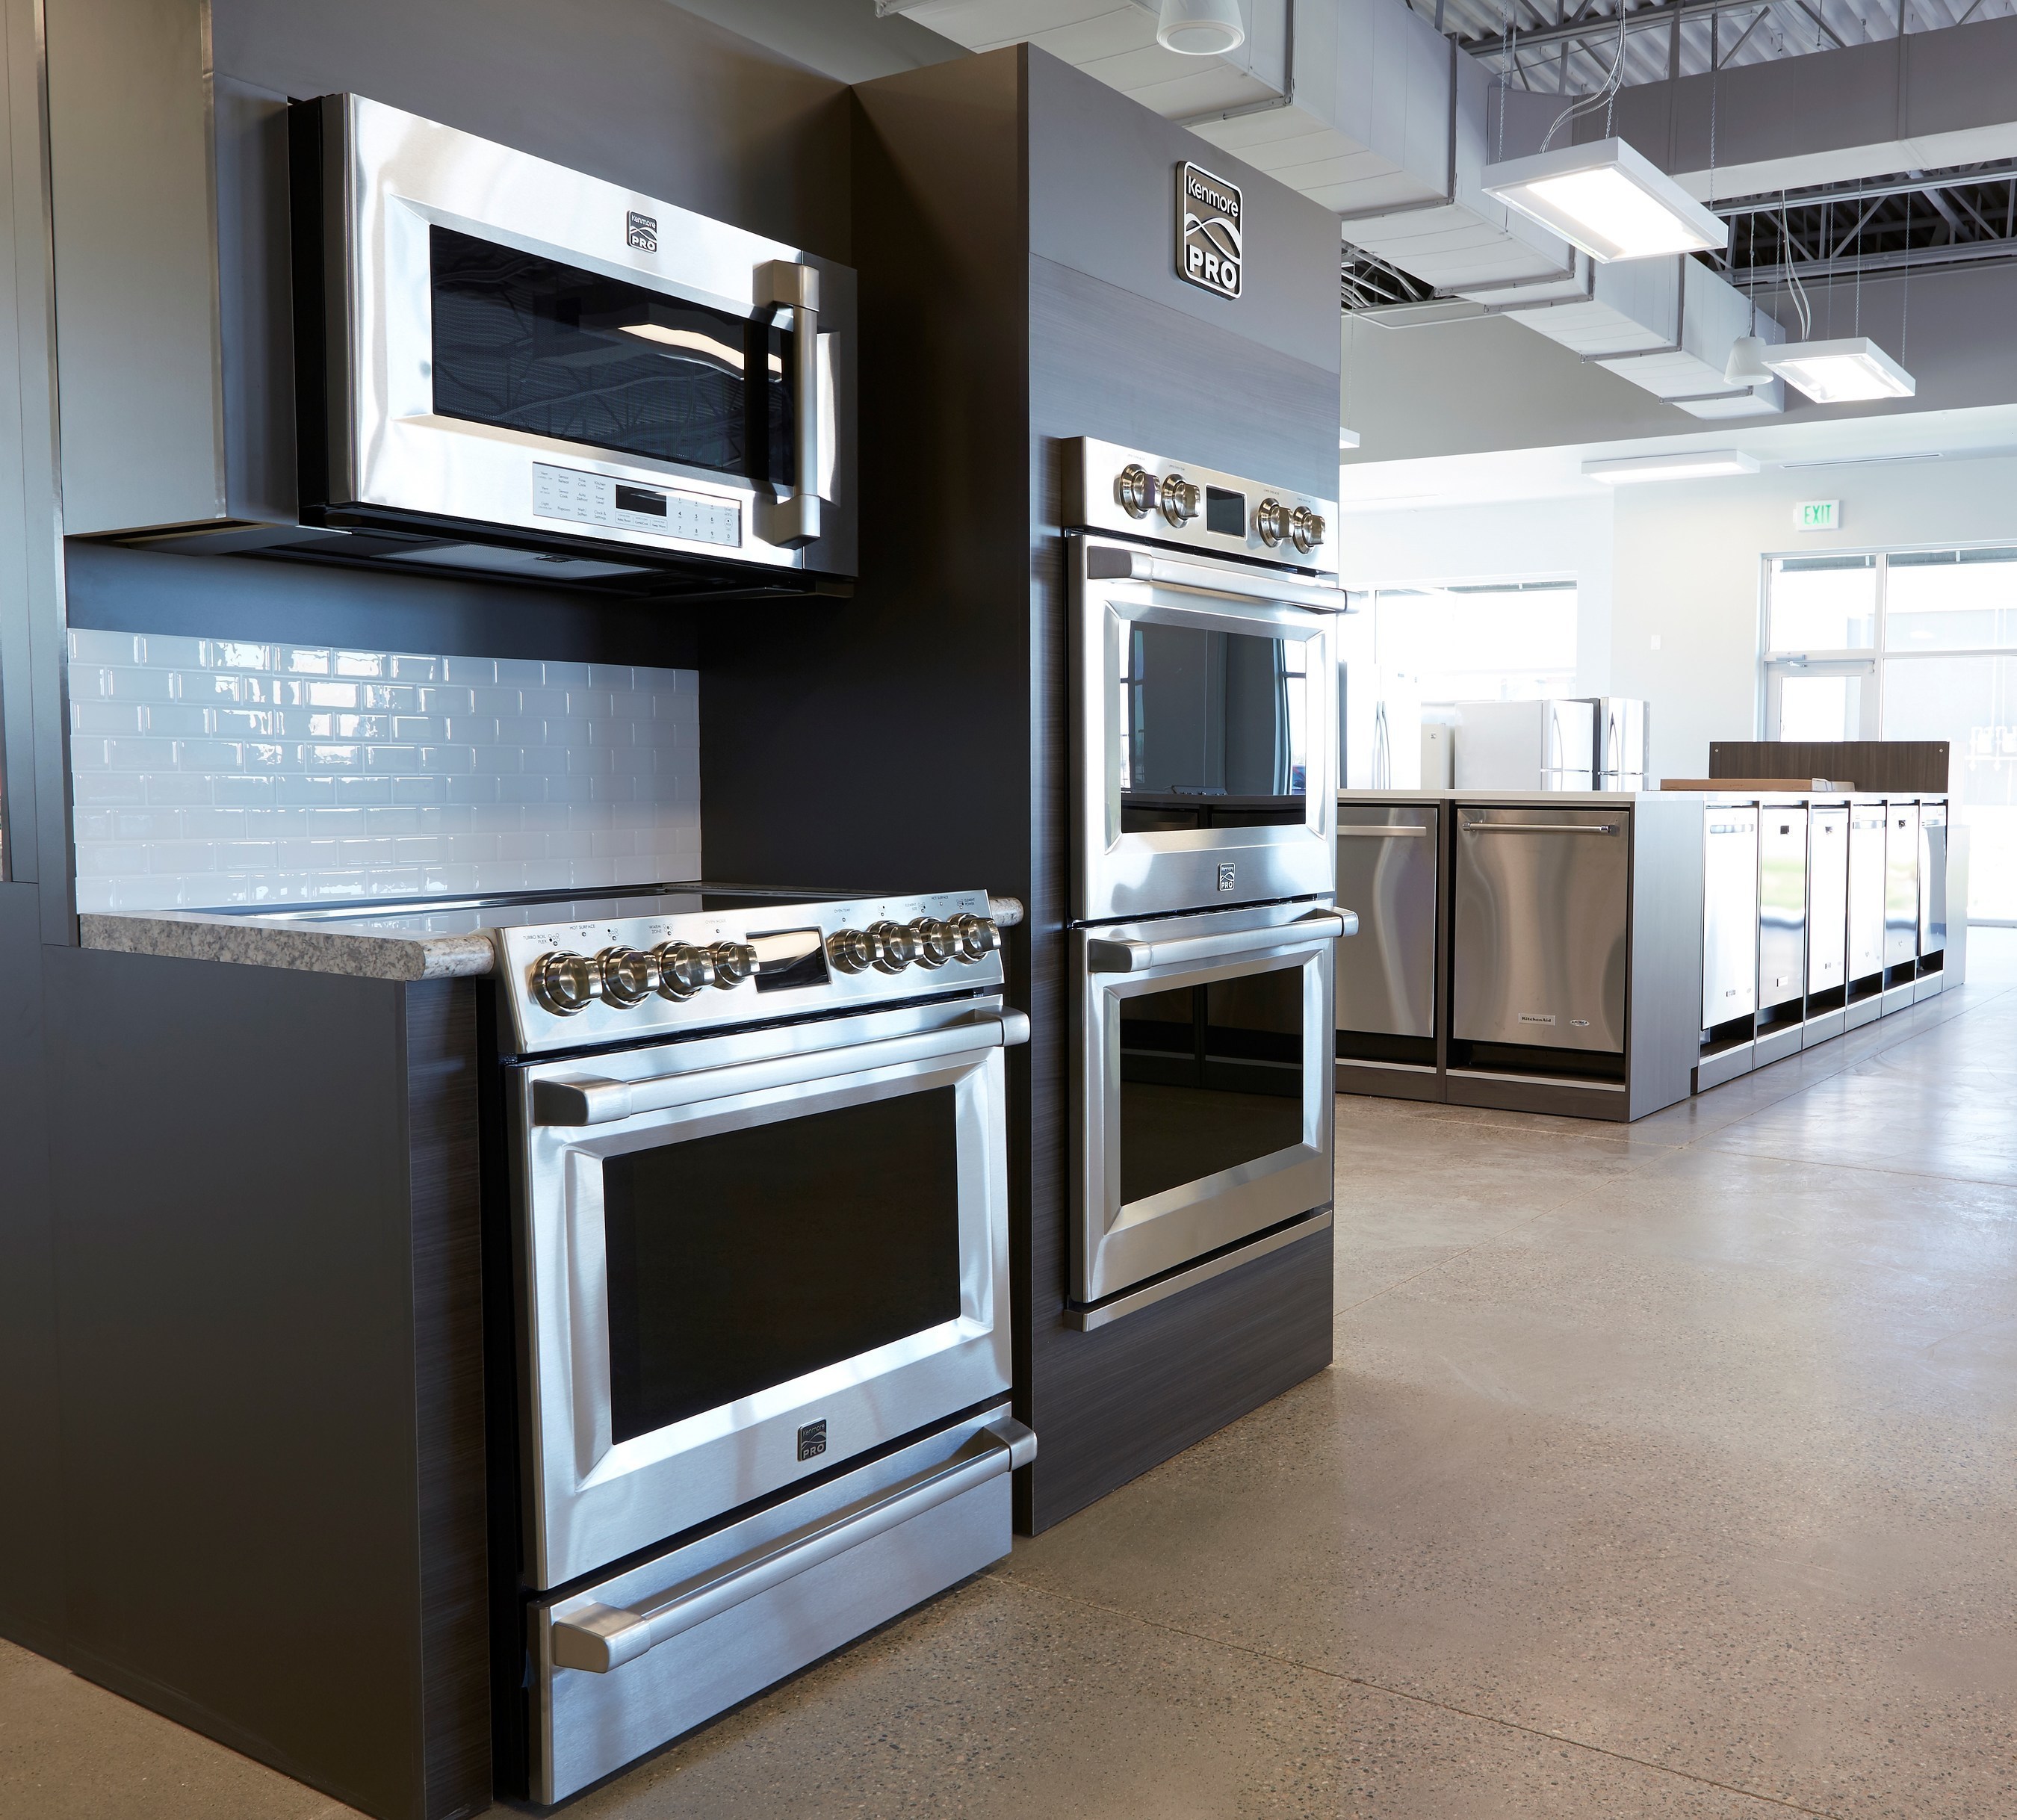 A new Sears store is set to open May 19 in Ft. Collins, Colorado, dedicated to one of the retailer's strongest categories - major appliances. The new store features the top 10 appliance brands, including the innovative Kenmore PRO line, plus leading Integrated Retail services and an interactive kitchen design display.